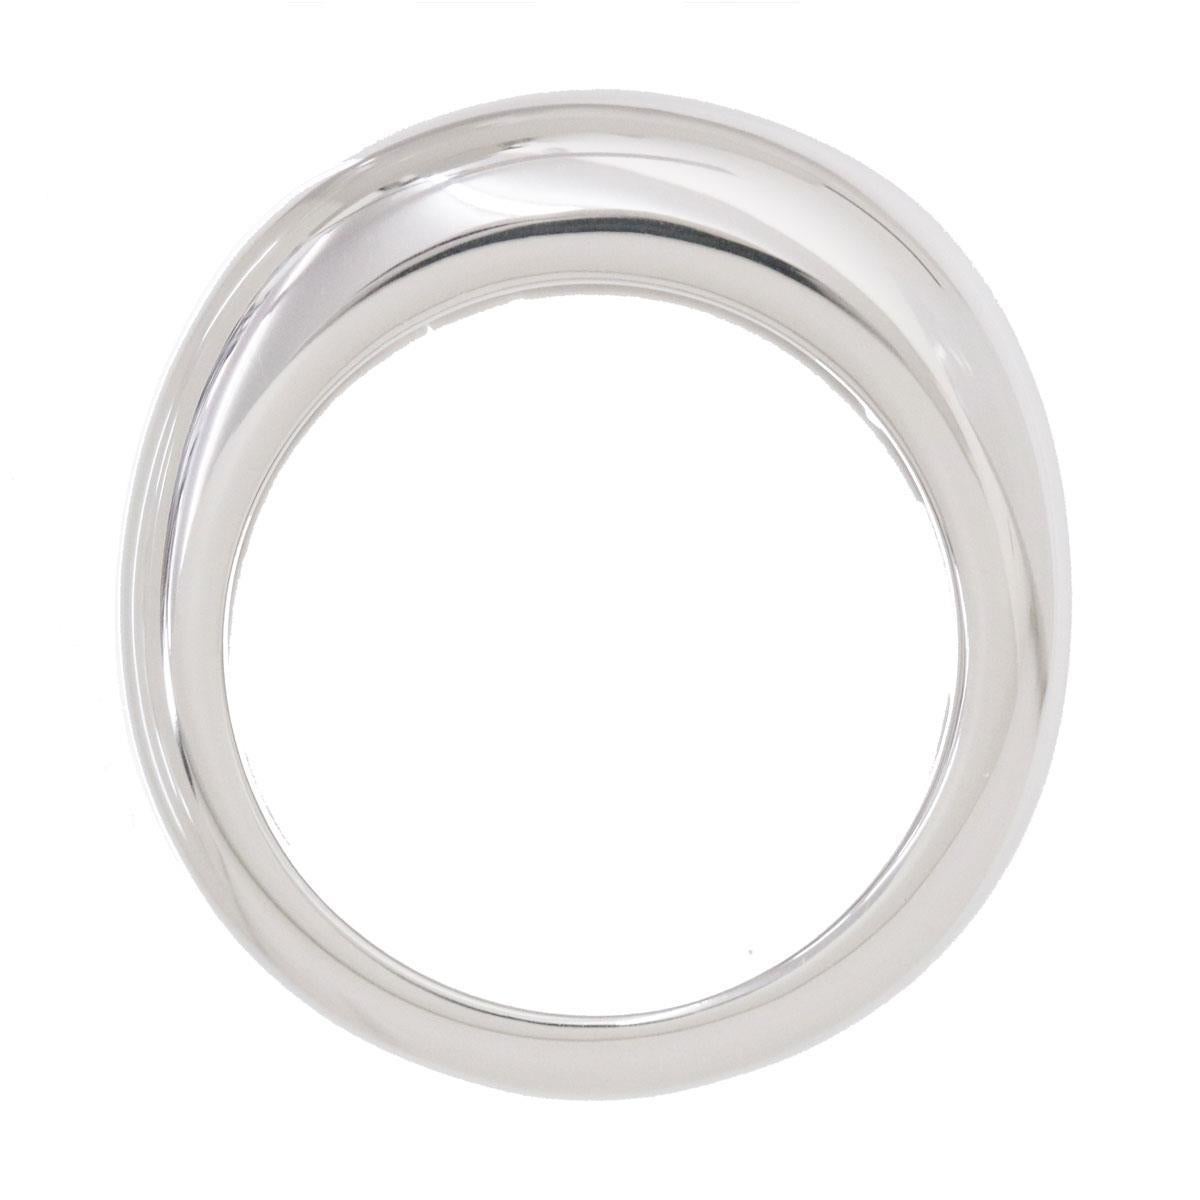 Featuring a wide silhouette, this Cartier Nouvelle Vague ring is designed in an 18k white gold. It features a slightly raised pattern with a striking 
high-polish finish. Comes with original Cartier box.  Ring is hallmarked 